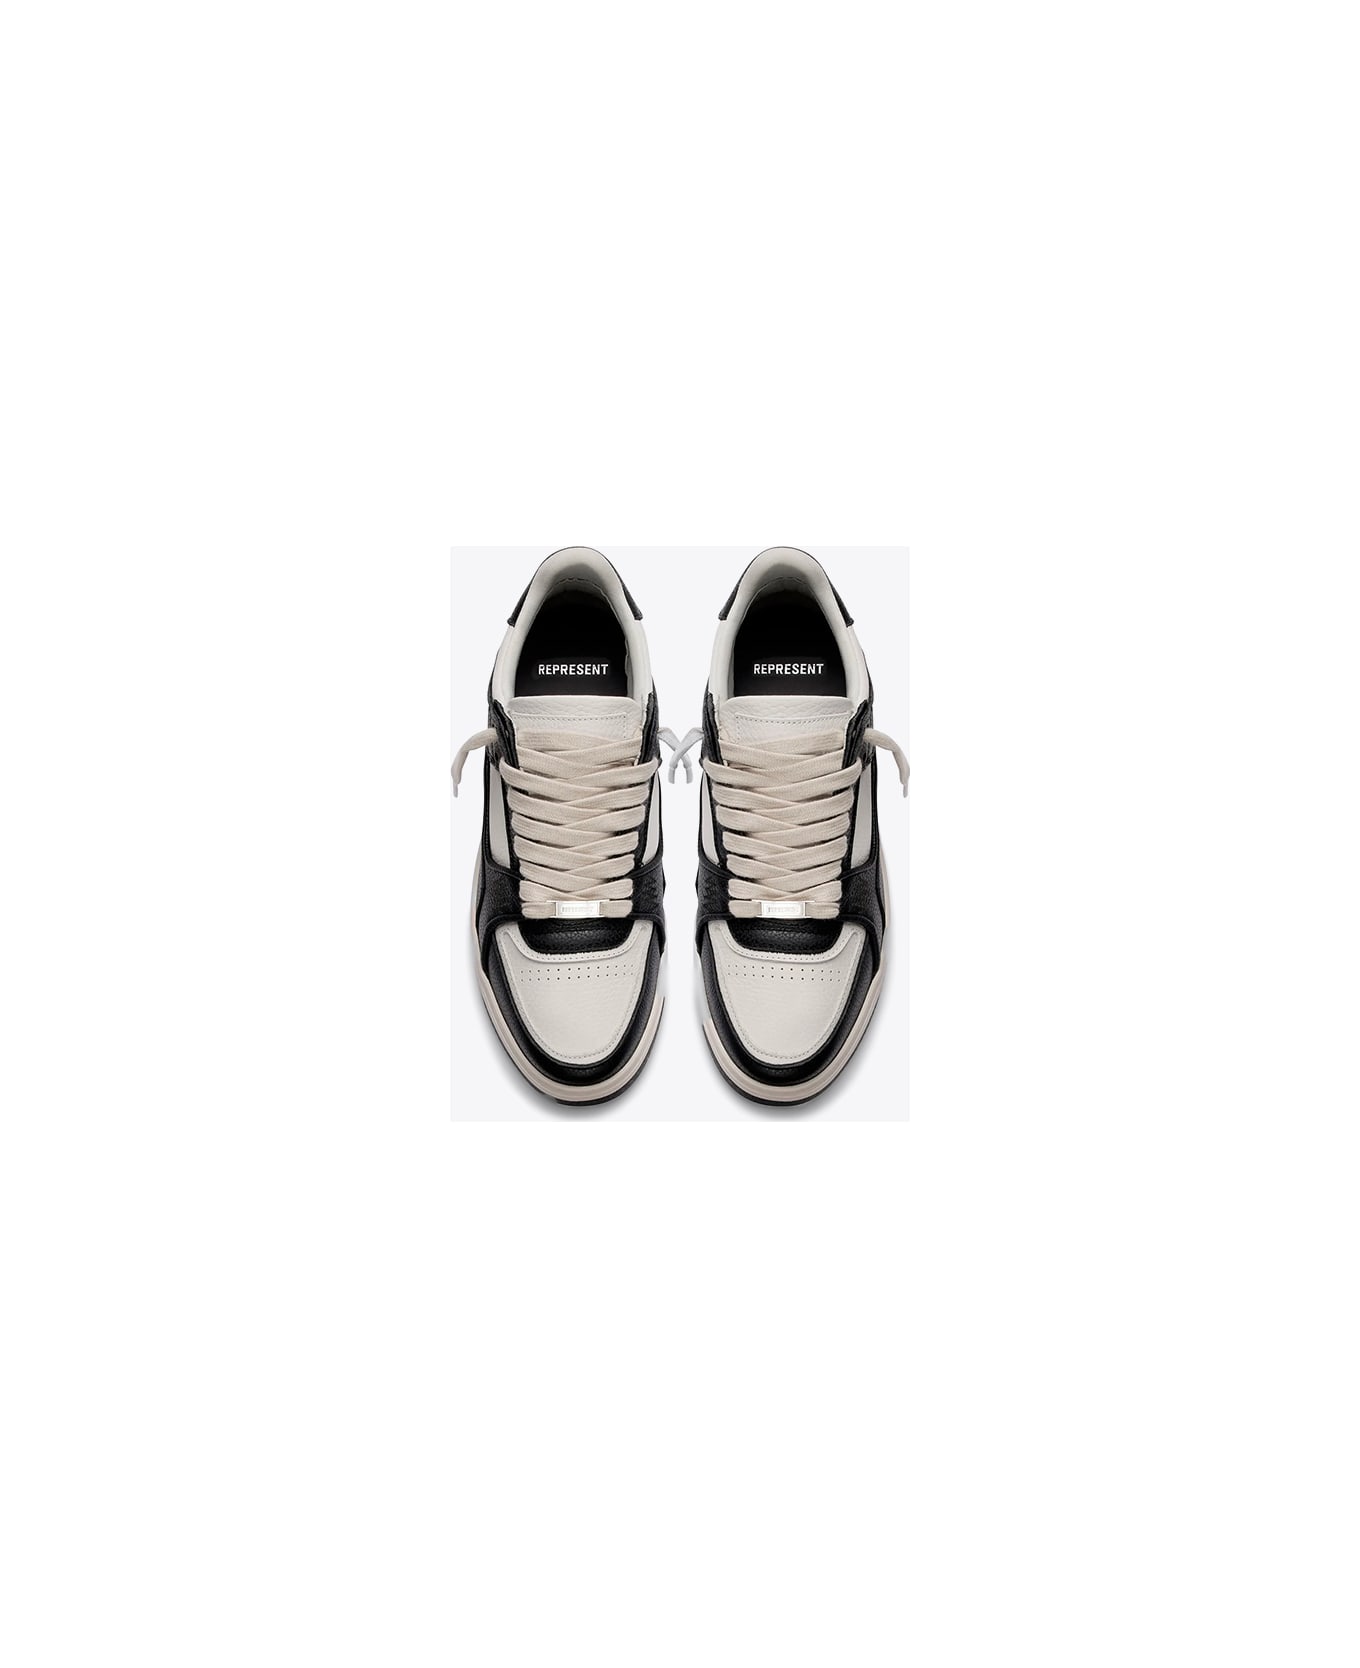 REPRESENT Apex Off White And Black Leather Low Top Sneaker - Apex Sneakers - VINTAGE WHITE